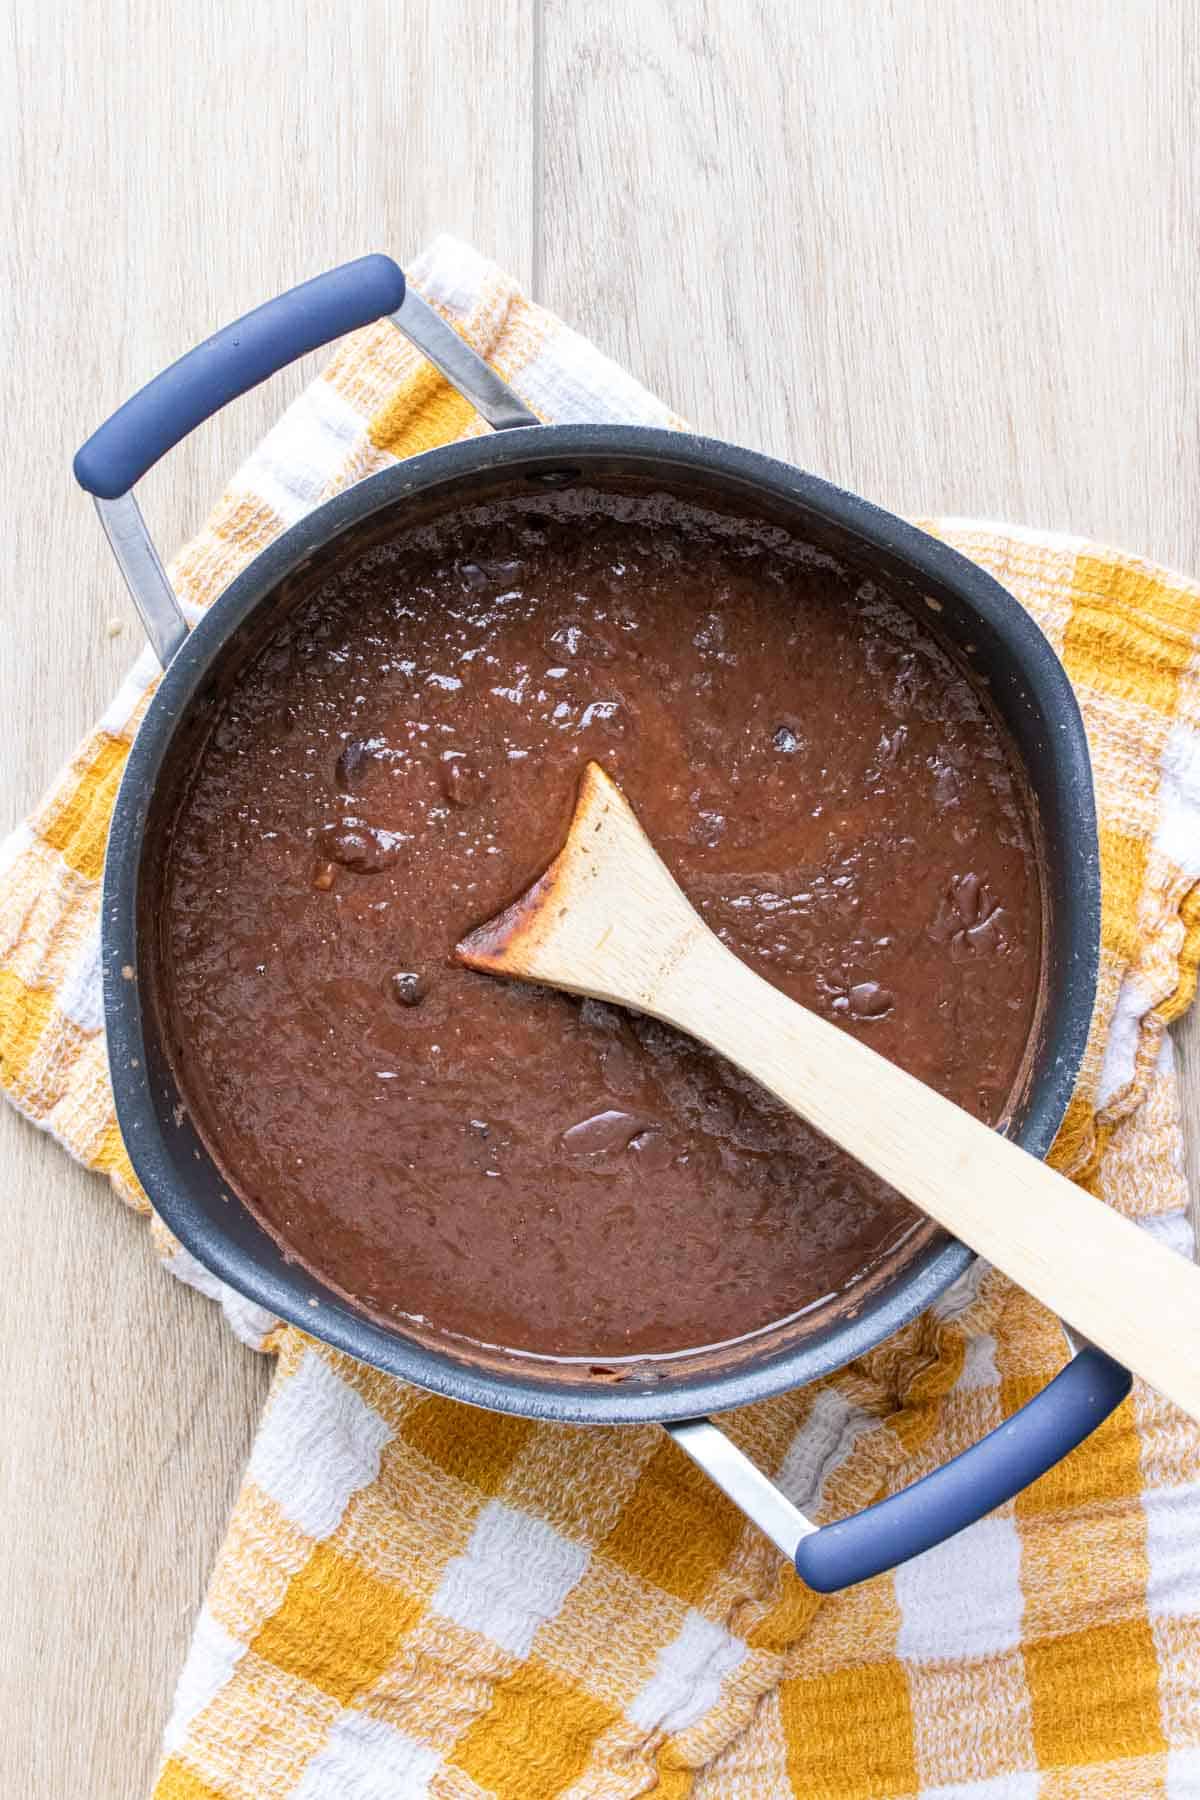 Wooden spoon mixing a pureed black bean soup in a pot on a checkered towel